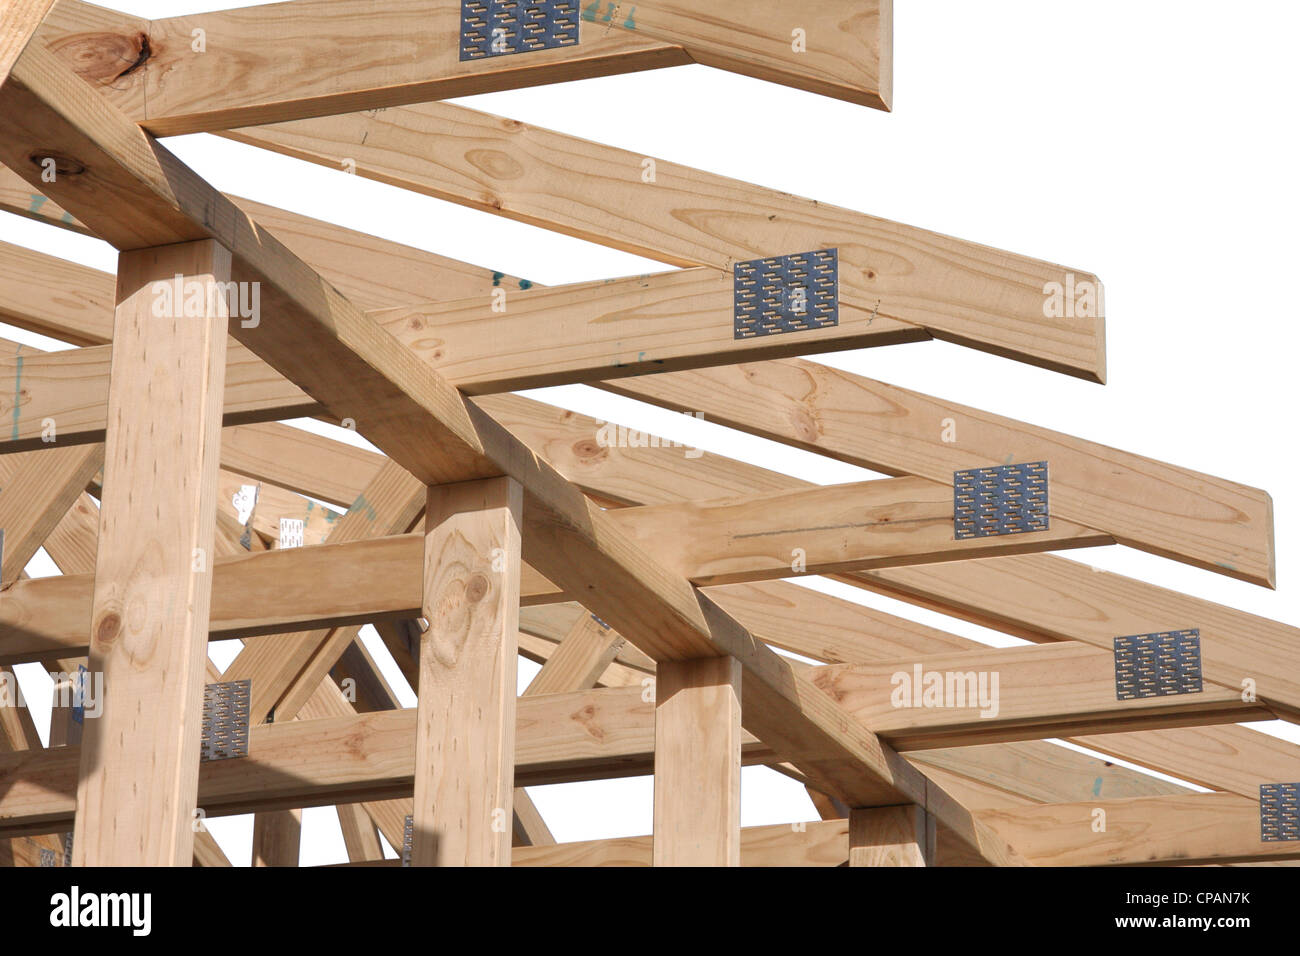 Roof construction Stock Photo